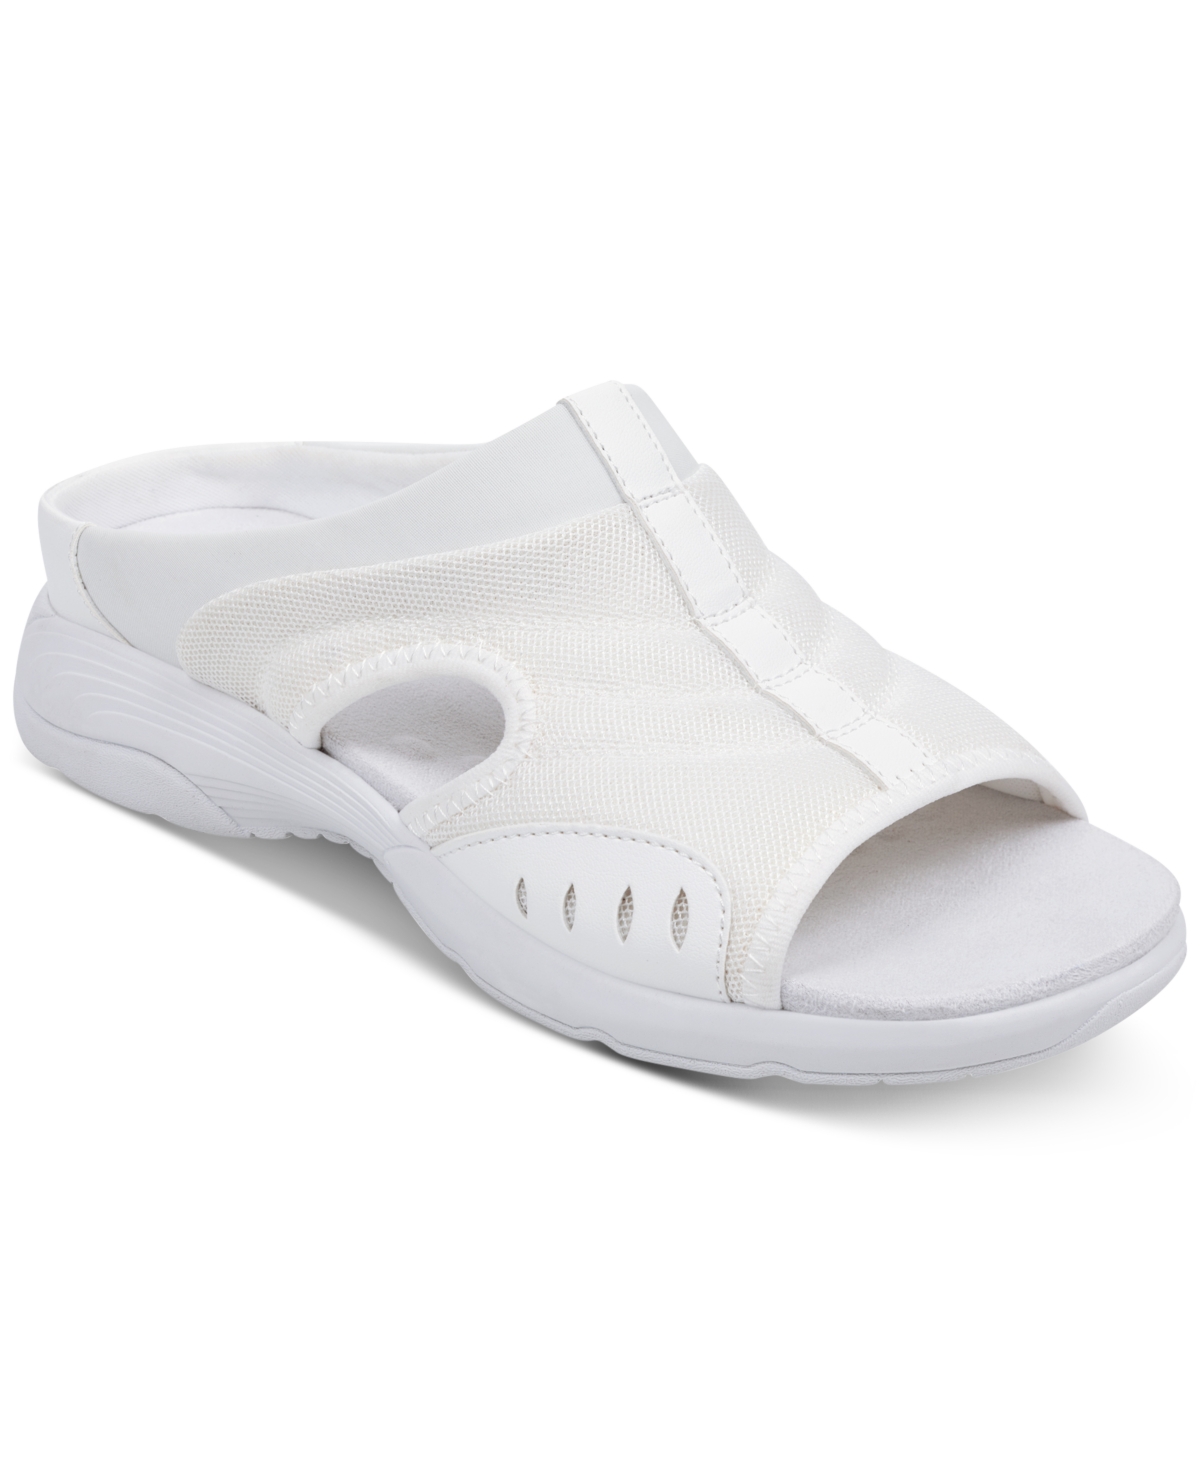 UPC 192733303784 product image for Easy Spirit Women's Traciee Square Toe Casual Flat Sandals Women's Shoes | upcitemdb.com